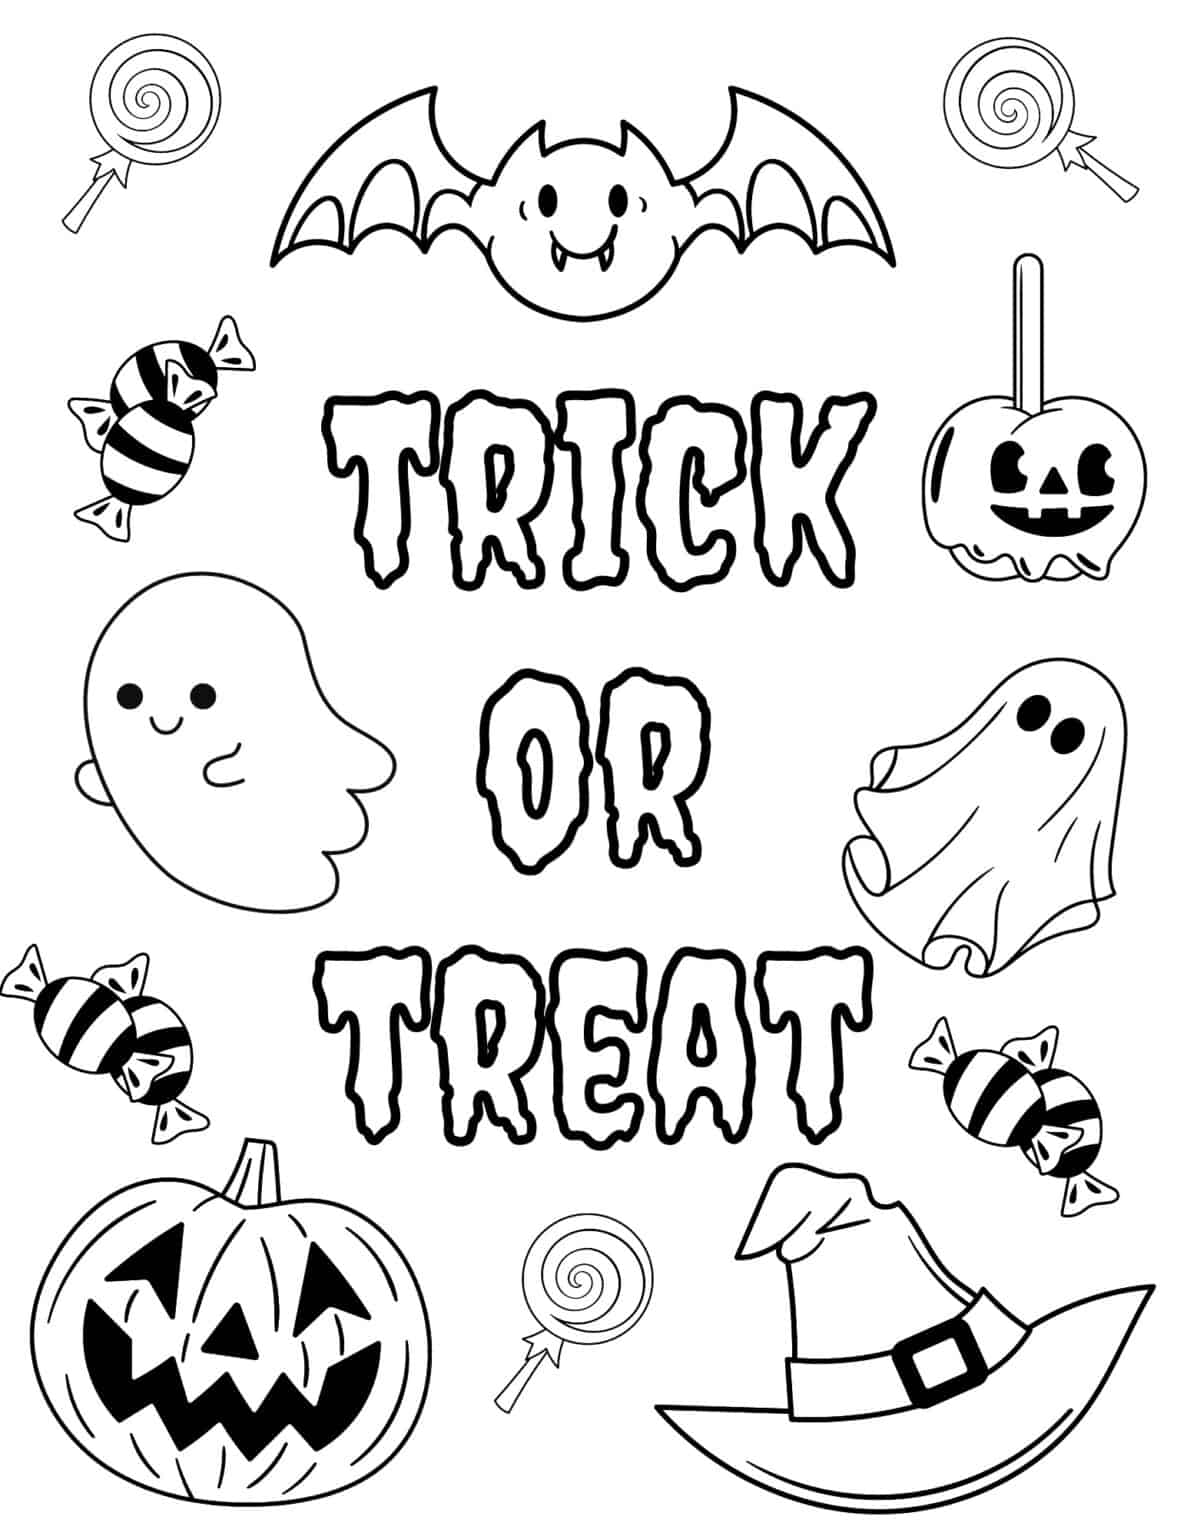 40 Free Halloween Coloring Pages for Kids and Adults - Prudent Penny ...